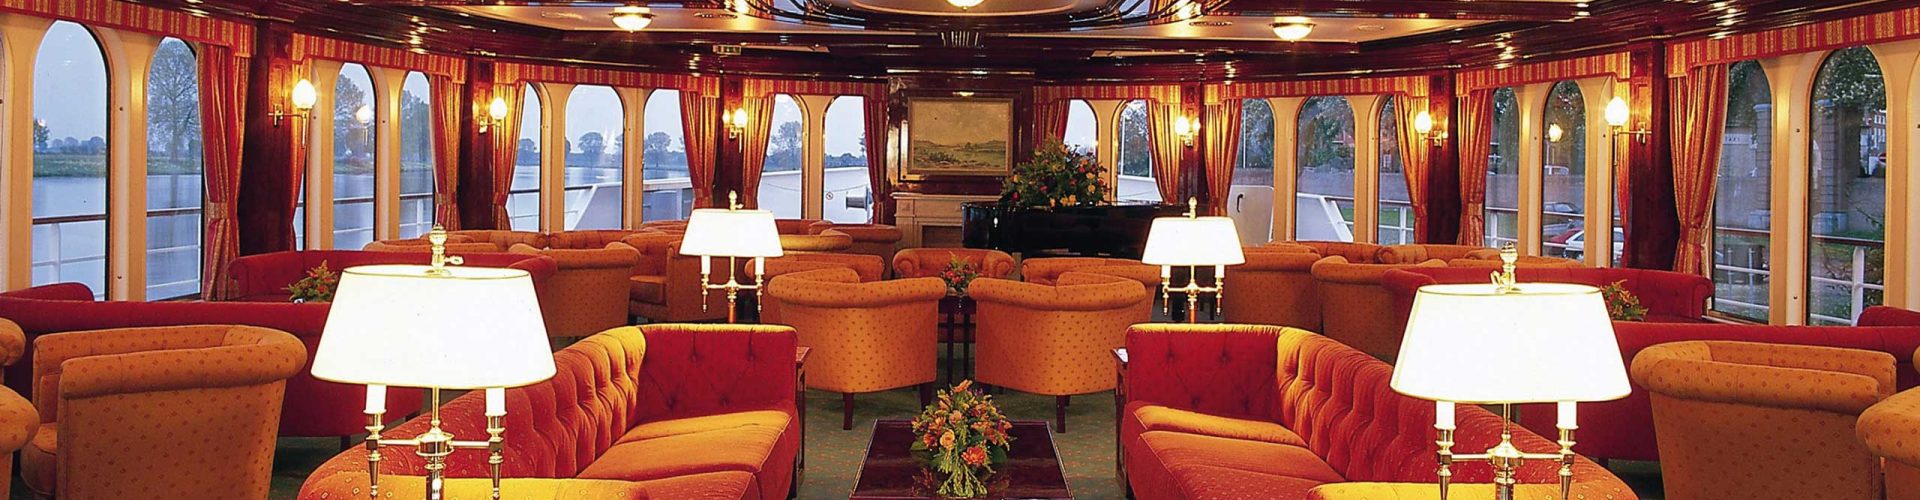 Cruise ship lounge with comfortable sofas